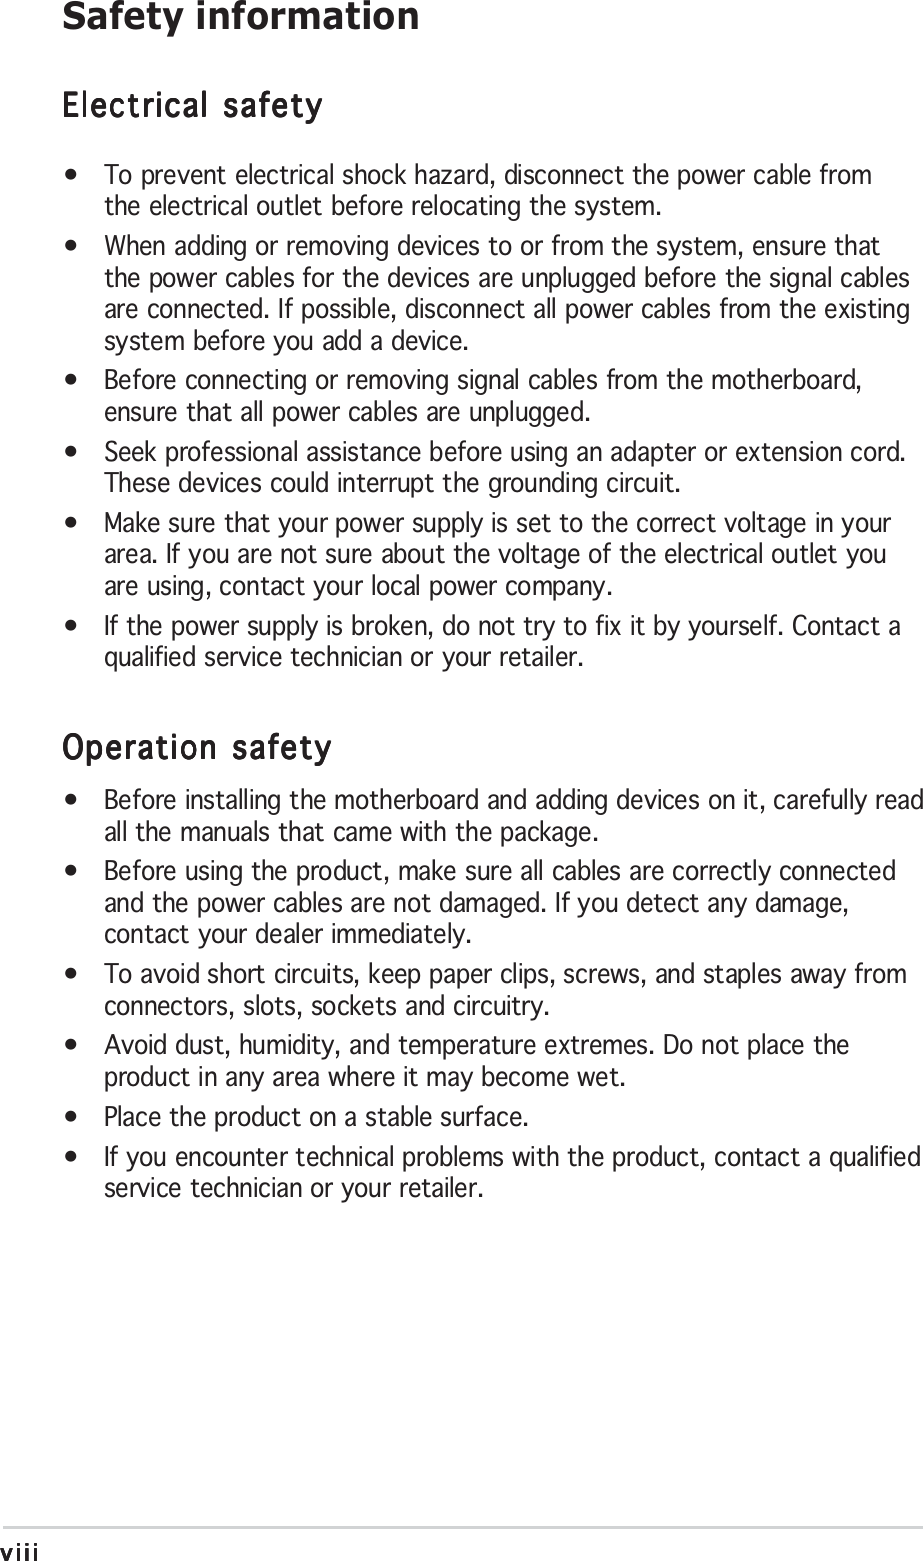 viiiviiiviiiviiiviiiSafety informationElectrical safetyElectrical safetyElectrical safetyElectrical safetyElectrical safety•To prevent electrical shock hazard, disconnect the power cable fromthe electrical outlet before relocating the system.•When adding or removing devices to or from the system, ensure thatthe power cables for the devices are unplugged before the signal cablesare connected. If possible, disconnect all power cables from the existingsystem before you add a device.•Before connecting or removing signal cables from the motherboard,ensure that all power cables are unplugged.•Seek professional assistance before using an adapter or extension cord.These devices could interrupt the grounding circuit.•Make sure that your power supply is set to the correct voltage in yourarea. If you are not sure about the voltage of the electrical outlet youare using, contact your local power company.•If the power supply is broken, do not try to fix it by yourself. Contact aqualified service technician or your retailer.Operation safetyOperation safetyOperation safetyOperation safetyOperation safety•Before installing the motherboard and adding devices on it, carefully readall the manuals that came with the package.•Before using the product, make sure all cables are correctly connectedand the power cables are not damaged. If you detect any damage,contact your dealer immediately.•To avoid short circuits, keep paper clips, screws, and staples away fromconnectors, slots, sockets and circuitry.•Avoid dust, humidity, and temperature extremes. Do not place theproduct in any area where it may become wet.•Place the product on a stable surface.•If you encounter technical problems with the product, contact a qualifiedservice technician or your retailer.